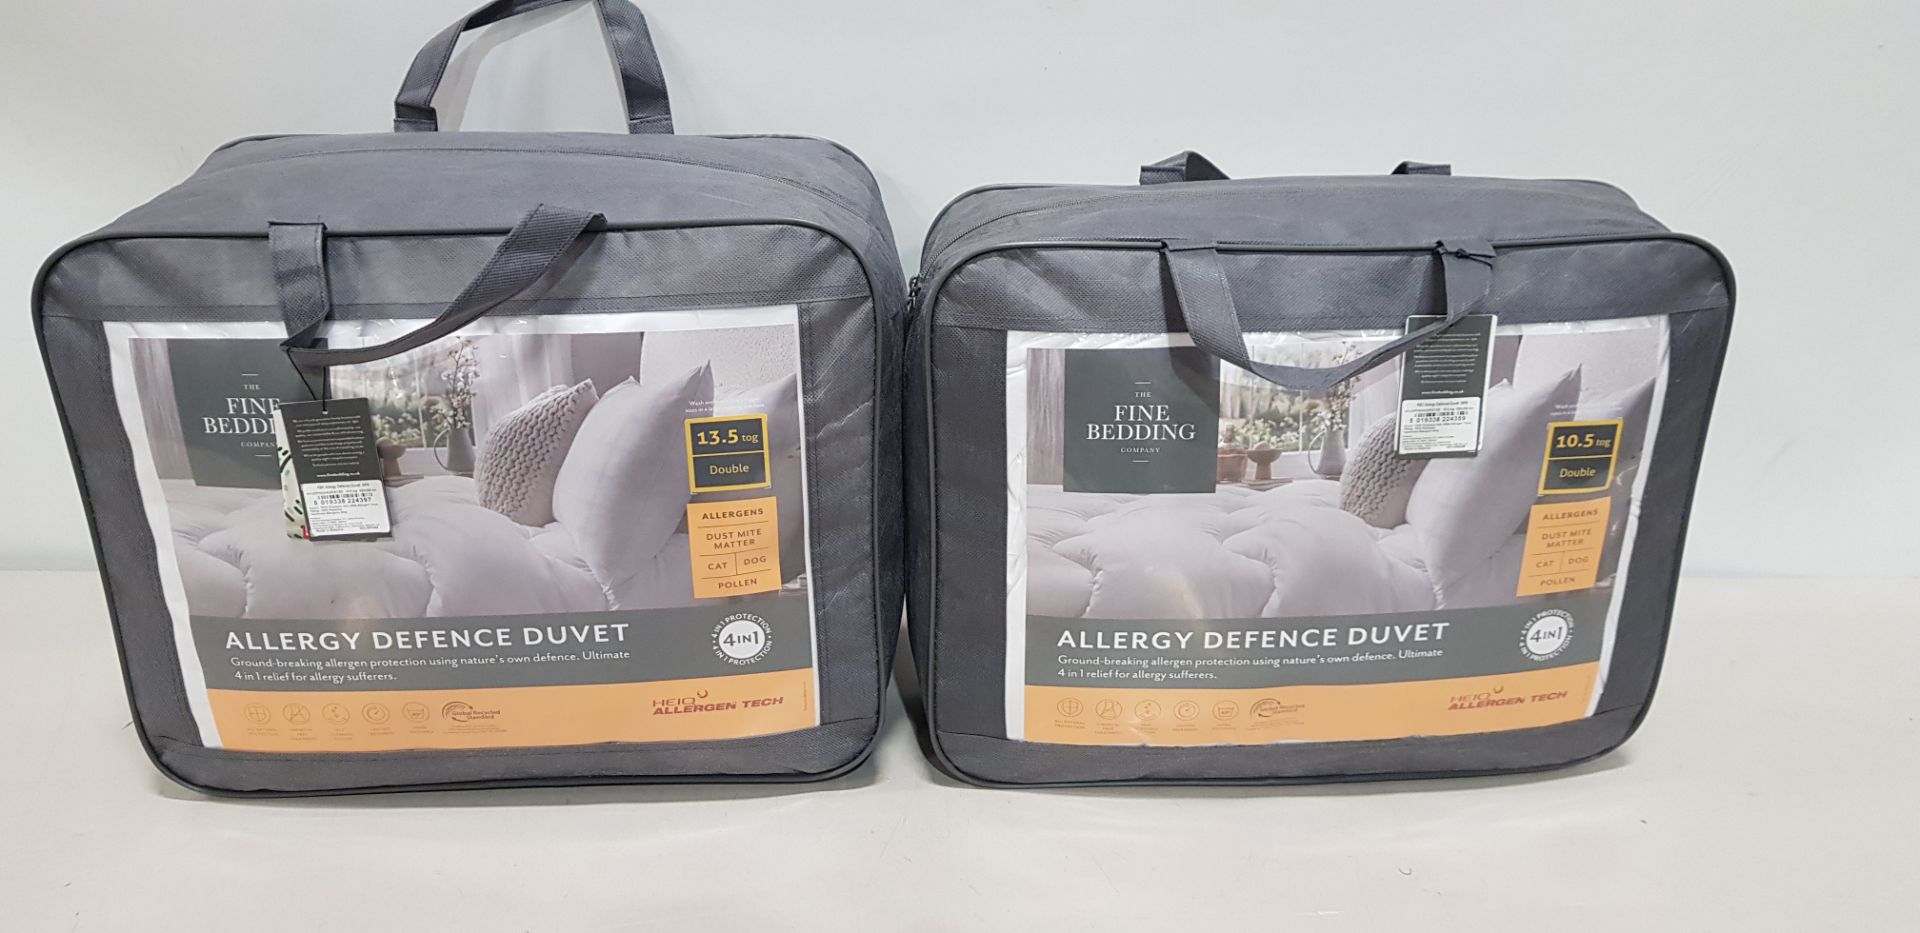 4 X BRAND NEW THE FINE BEDDING COMPANY ALLERGY DEFENCE DUVETS 2 DOUBLE 13.5 TOG AND 2 DOUBLE 10.5